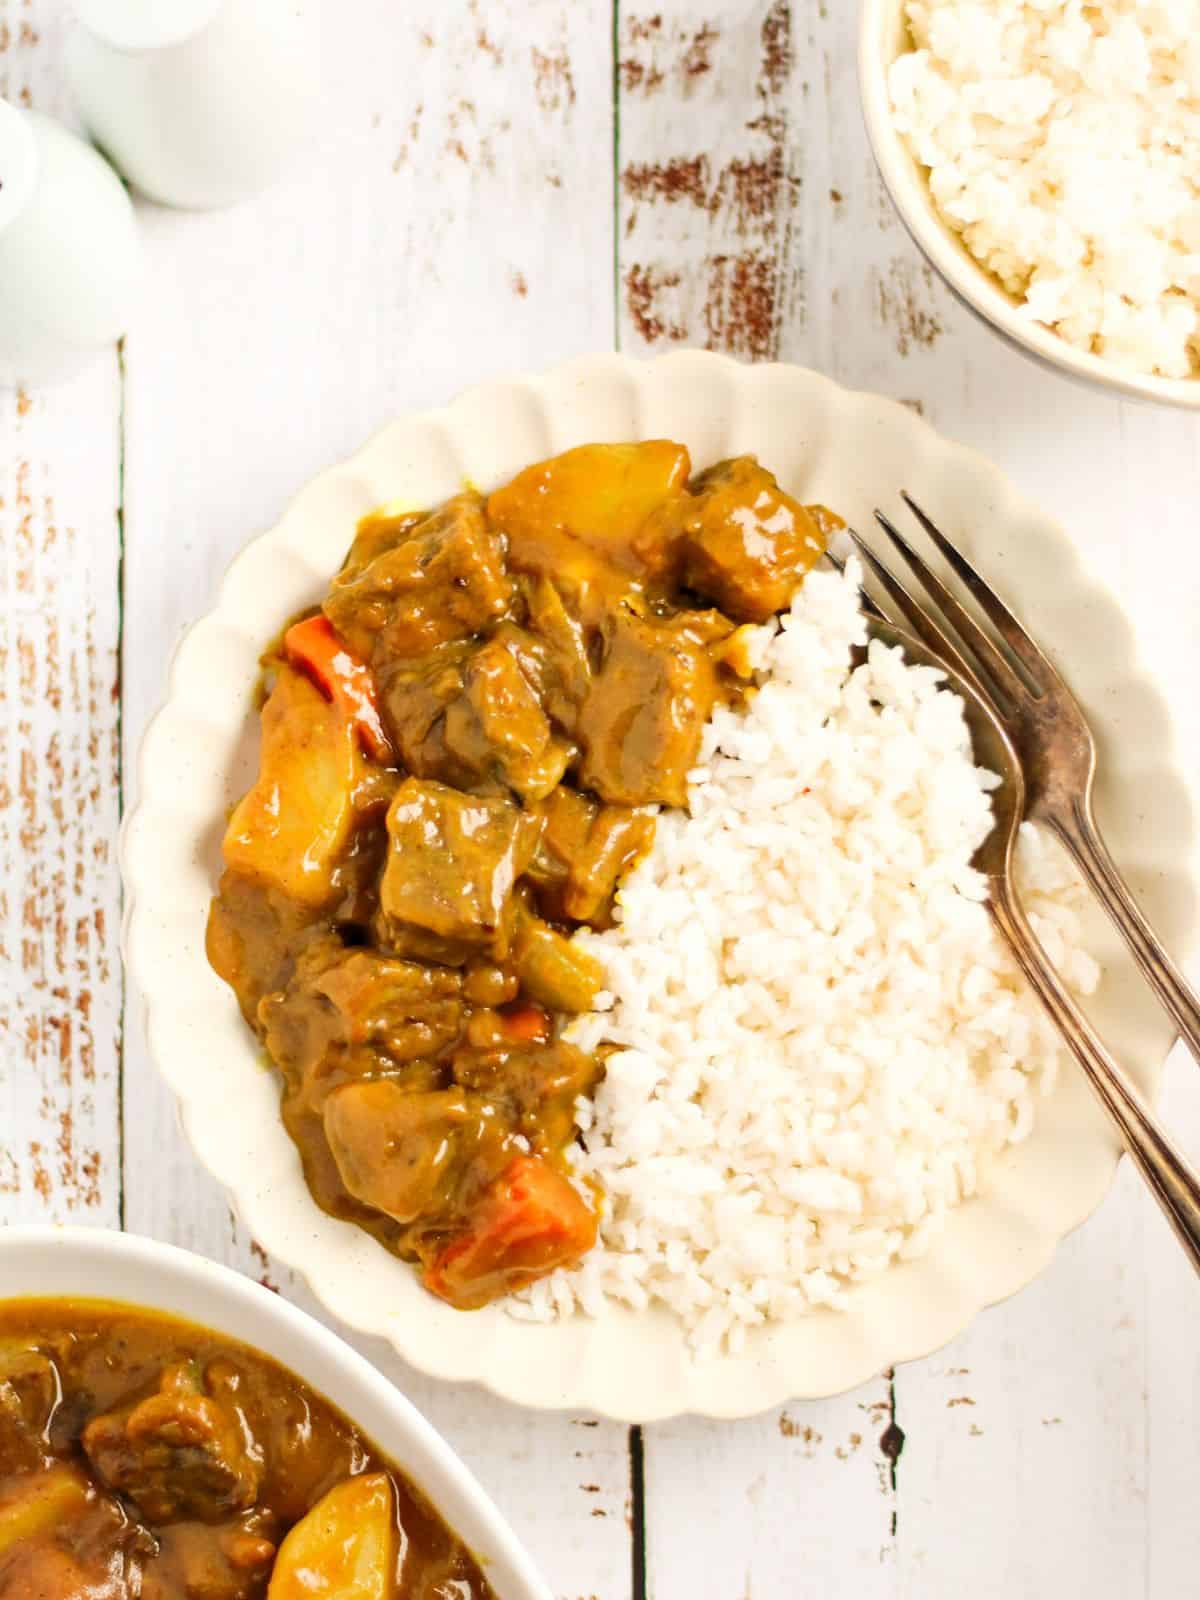 Japanese curry with white rice in a plate.